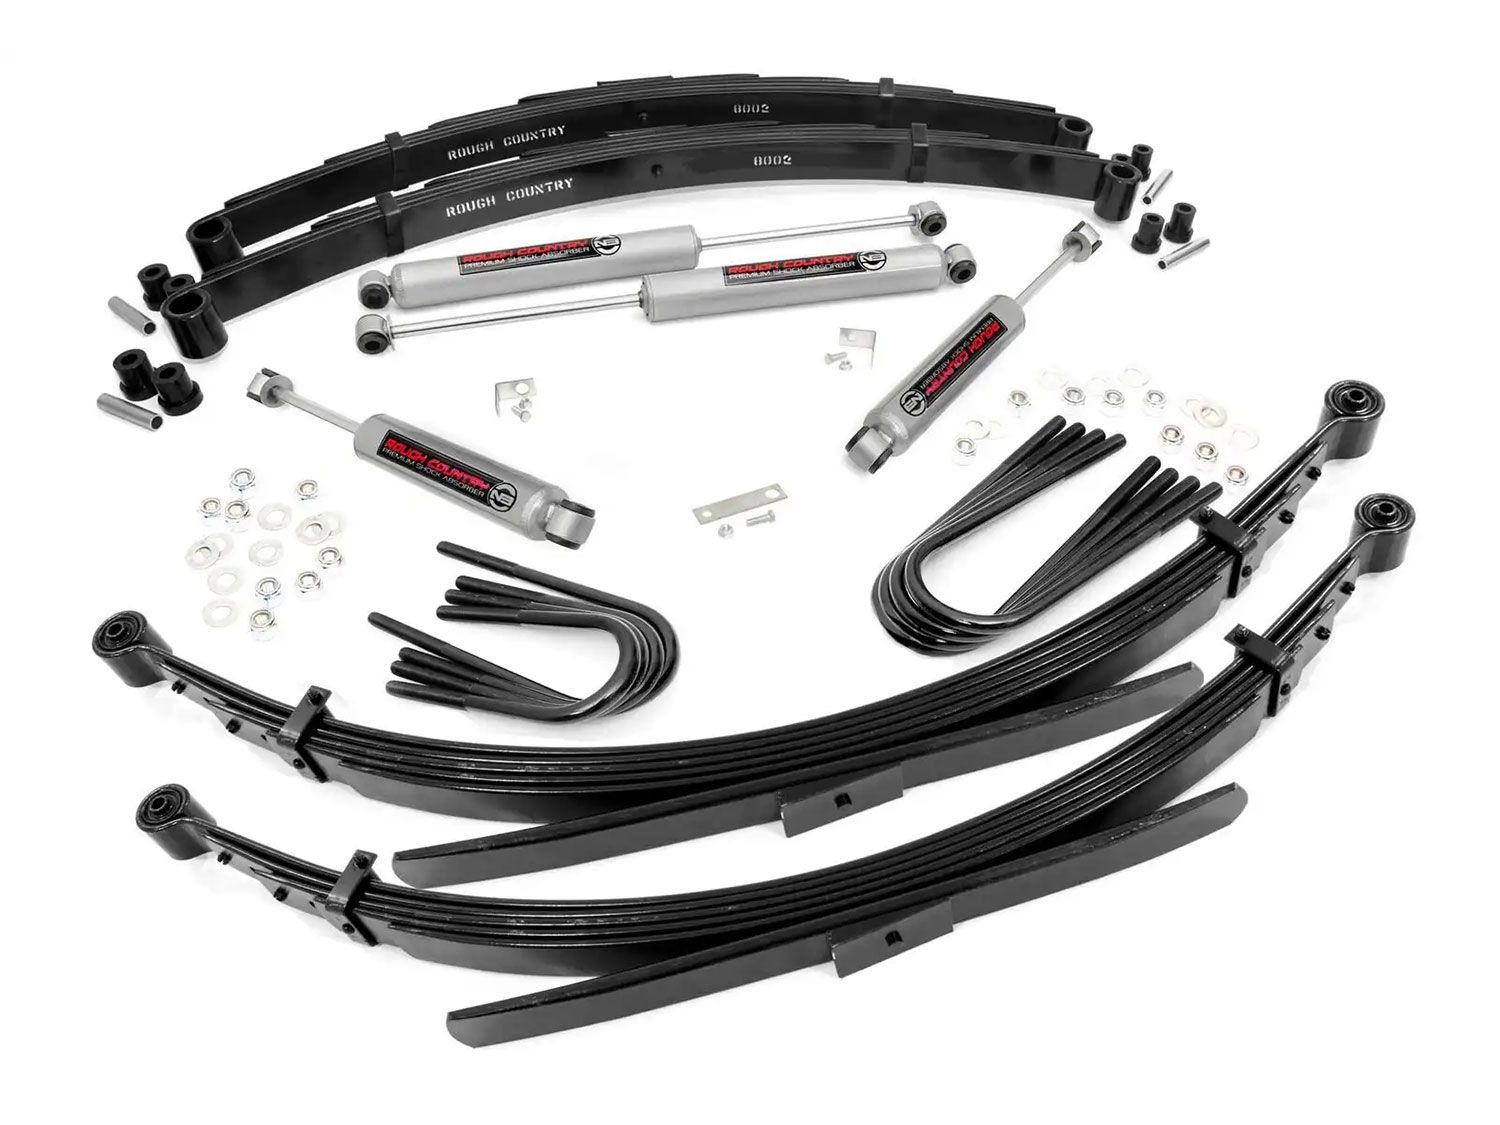 2" 1973-1976 Chevy Pickup 3/4 Ton 4WD Lift Kit (with rear springs) by Rough Country